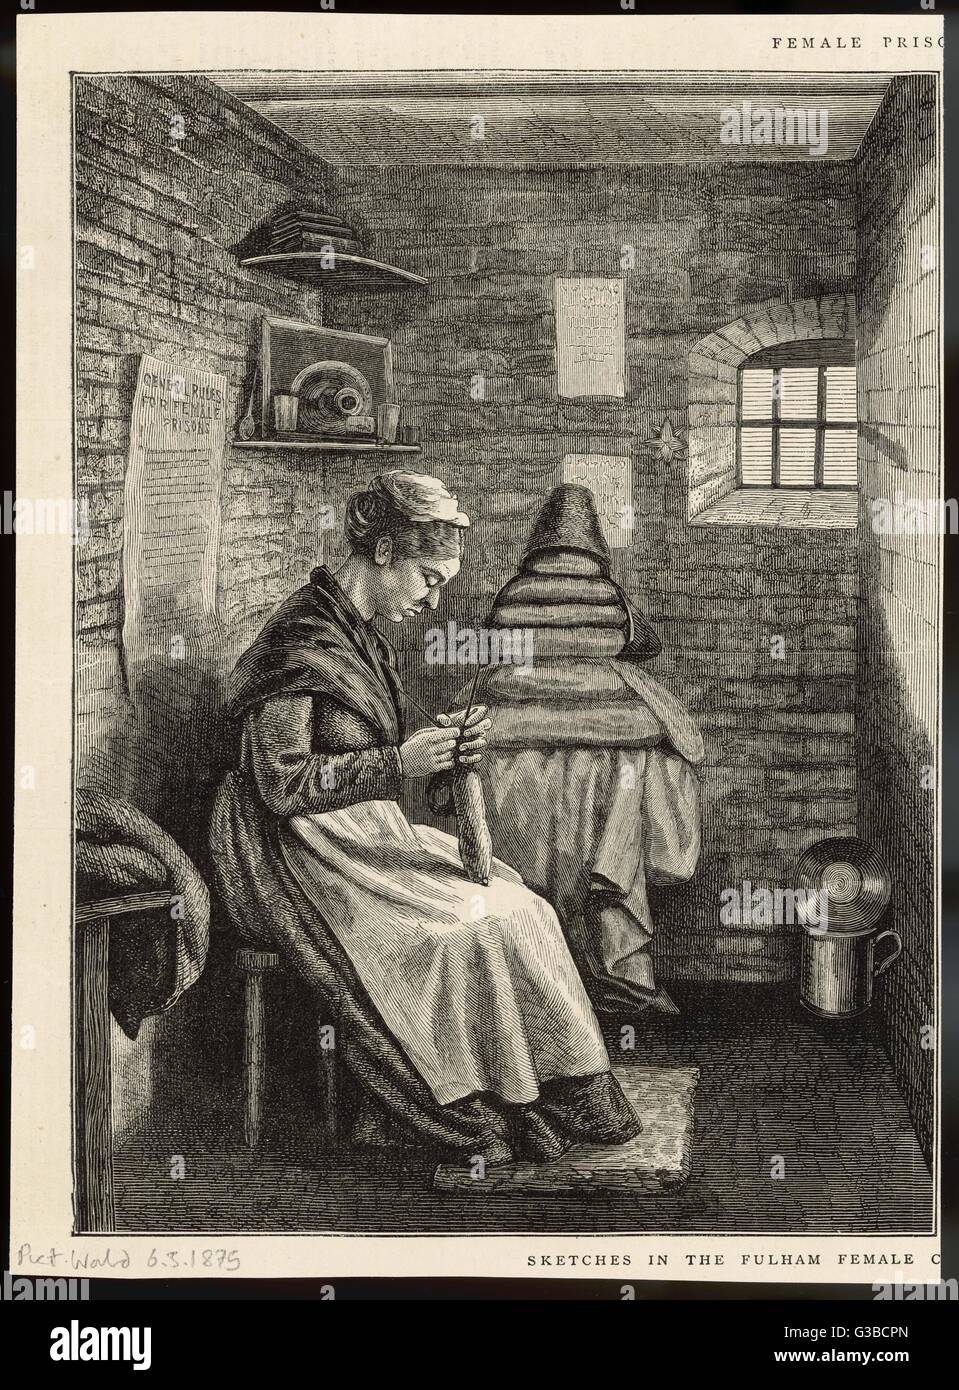 A women working in her cell at this female prison.        Date: 1875 Stock Photo